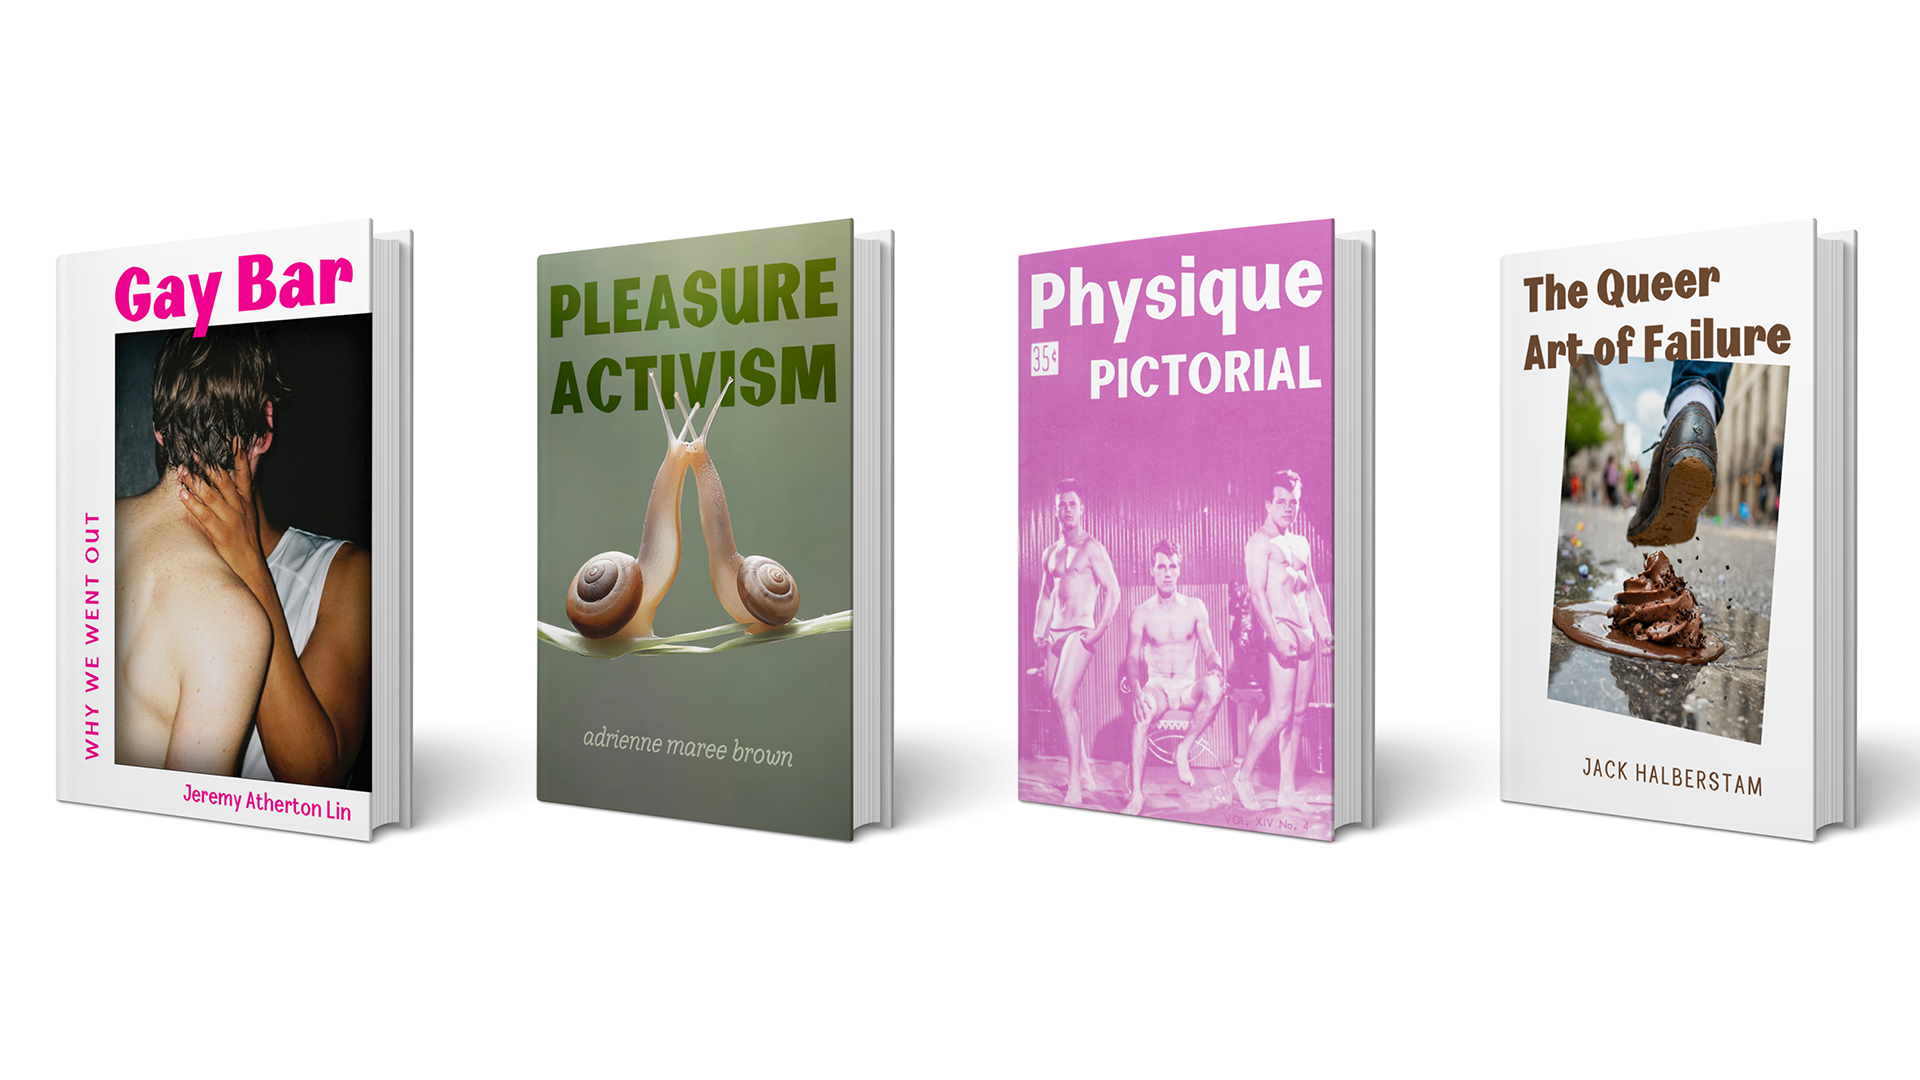 Four book cover mockups: Gay Bar, Pleasure Activism, Physique Pictorial, and The Queer Art of Failure.